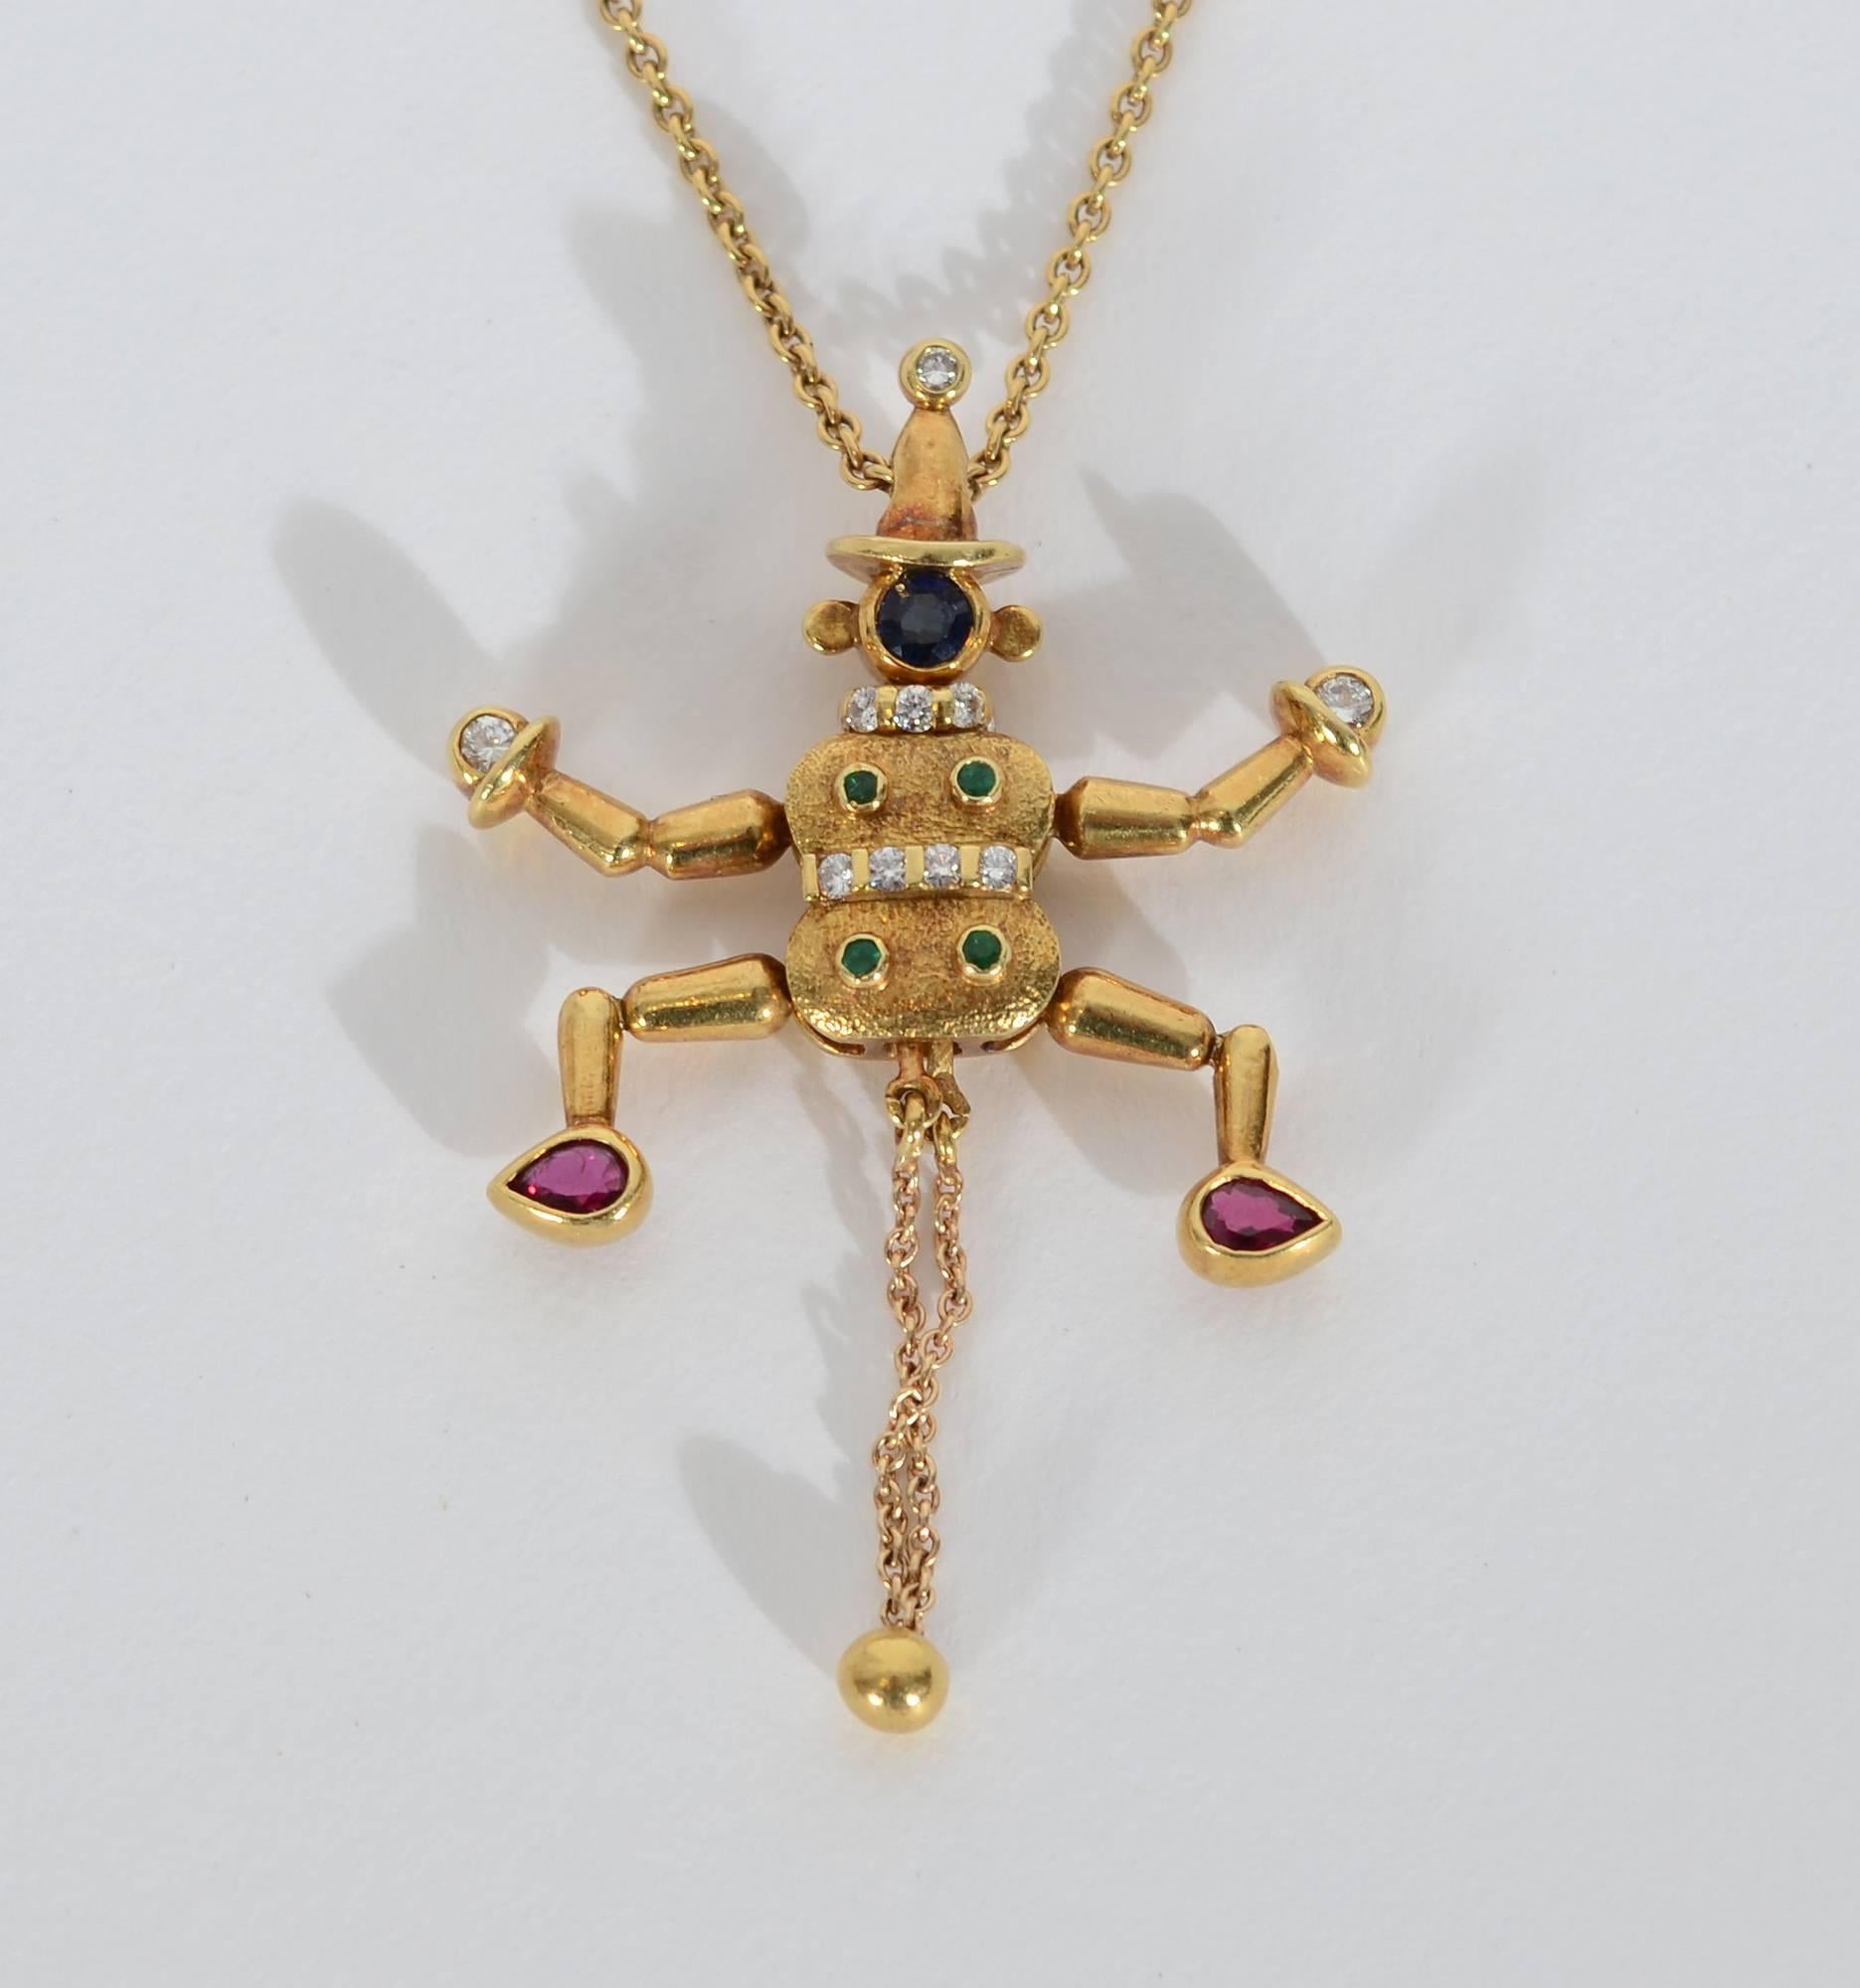 This whimsical clown pendant moves his arms and legs when one pulls the chain beneath him. The clown has a blue sapphire face; ruby feet; diamond hands, belt and neck collar and emeralds on his body. He is strung on a 15 1/2 inch chain of 18 karat